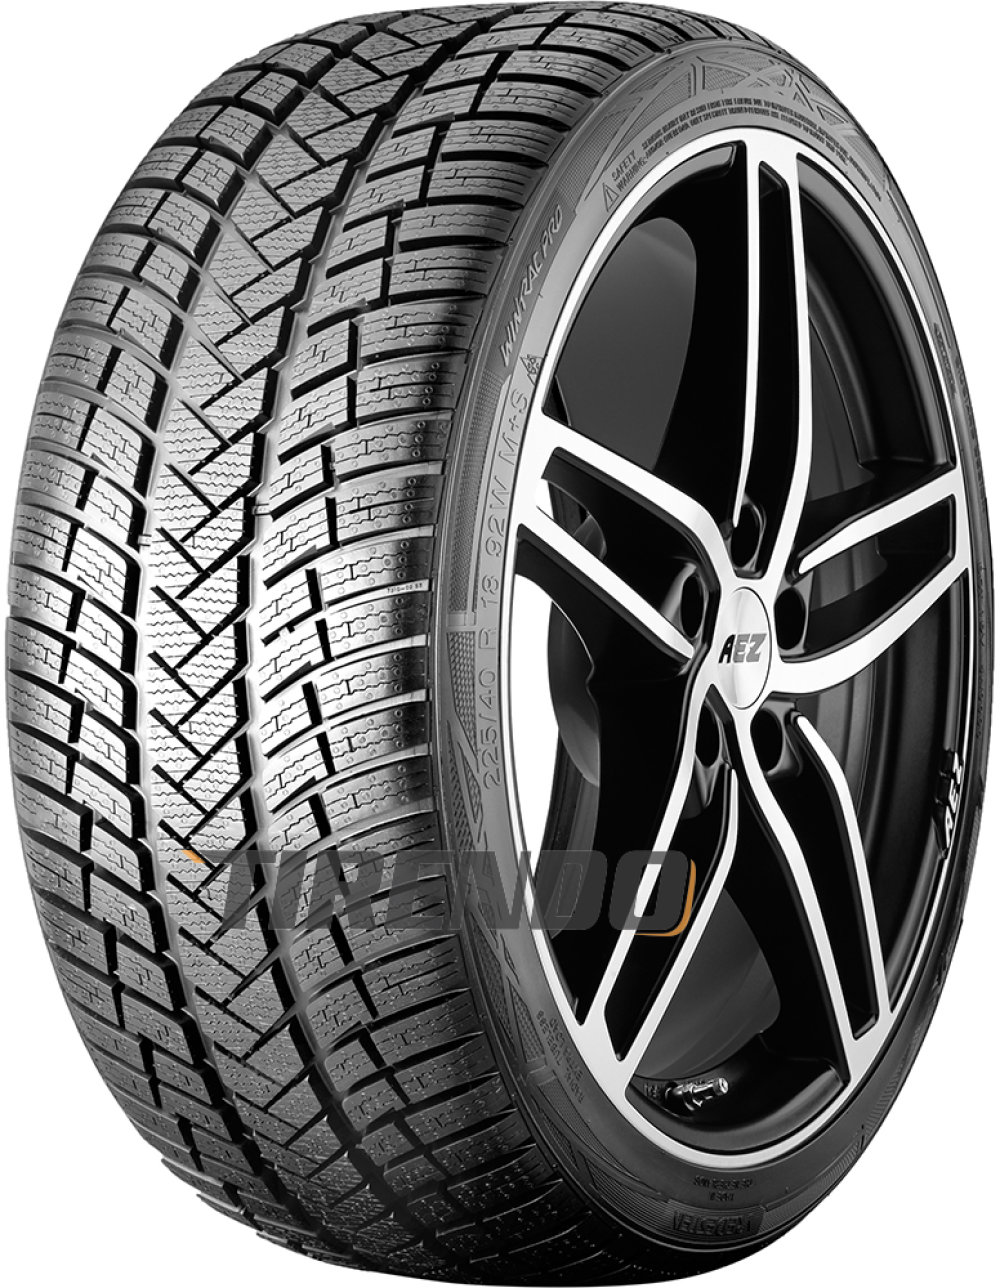 Image of Vredestein Wintrac Pro ( 195/55 R20 95H XL )